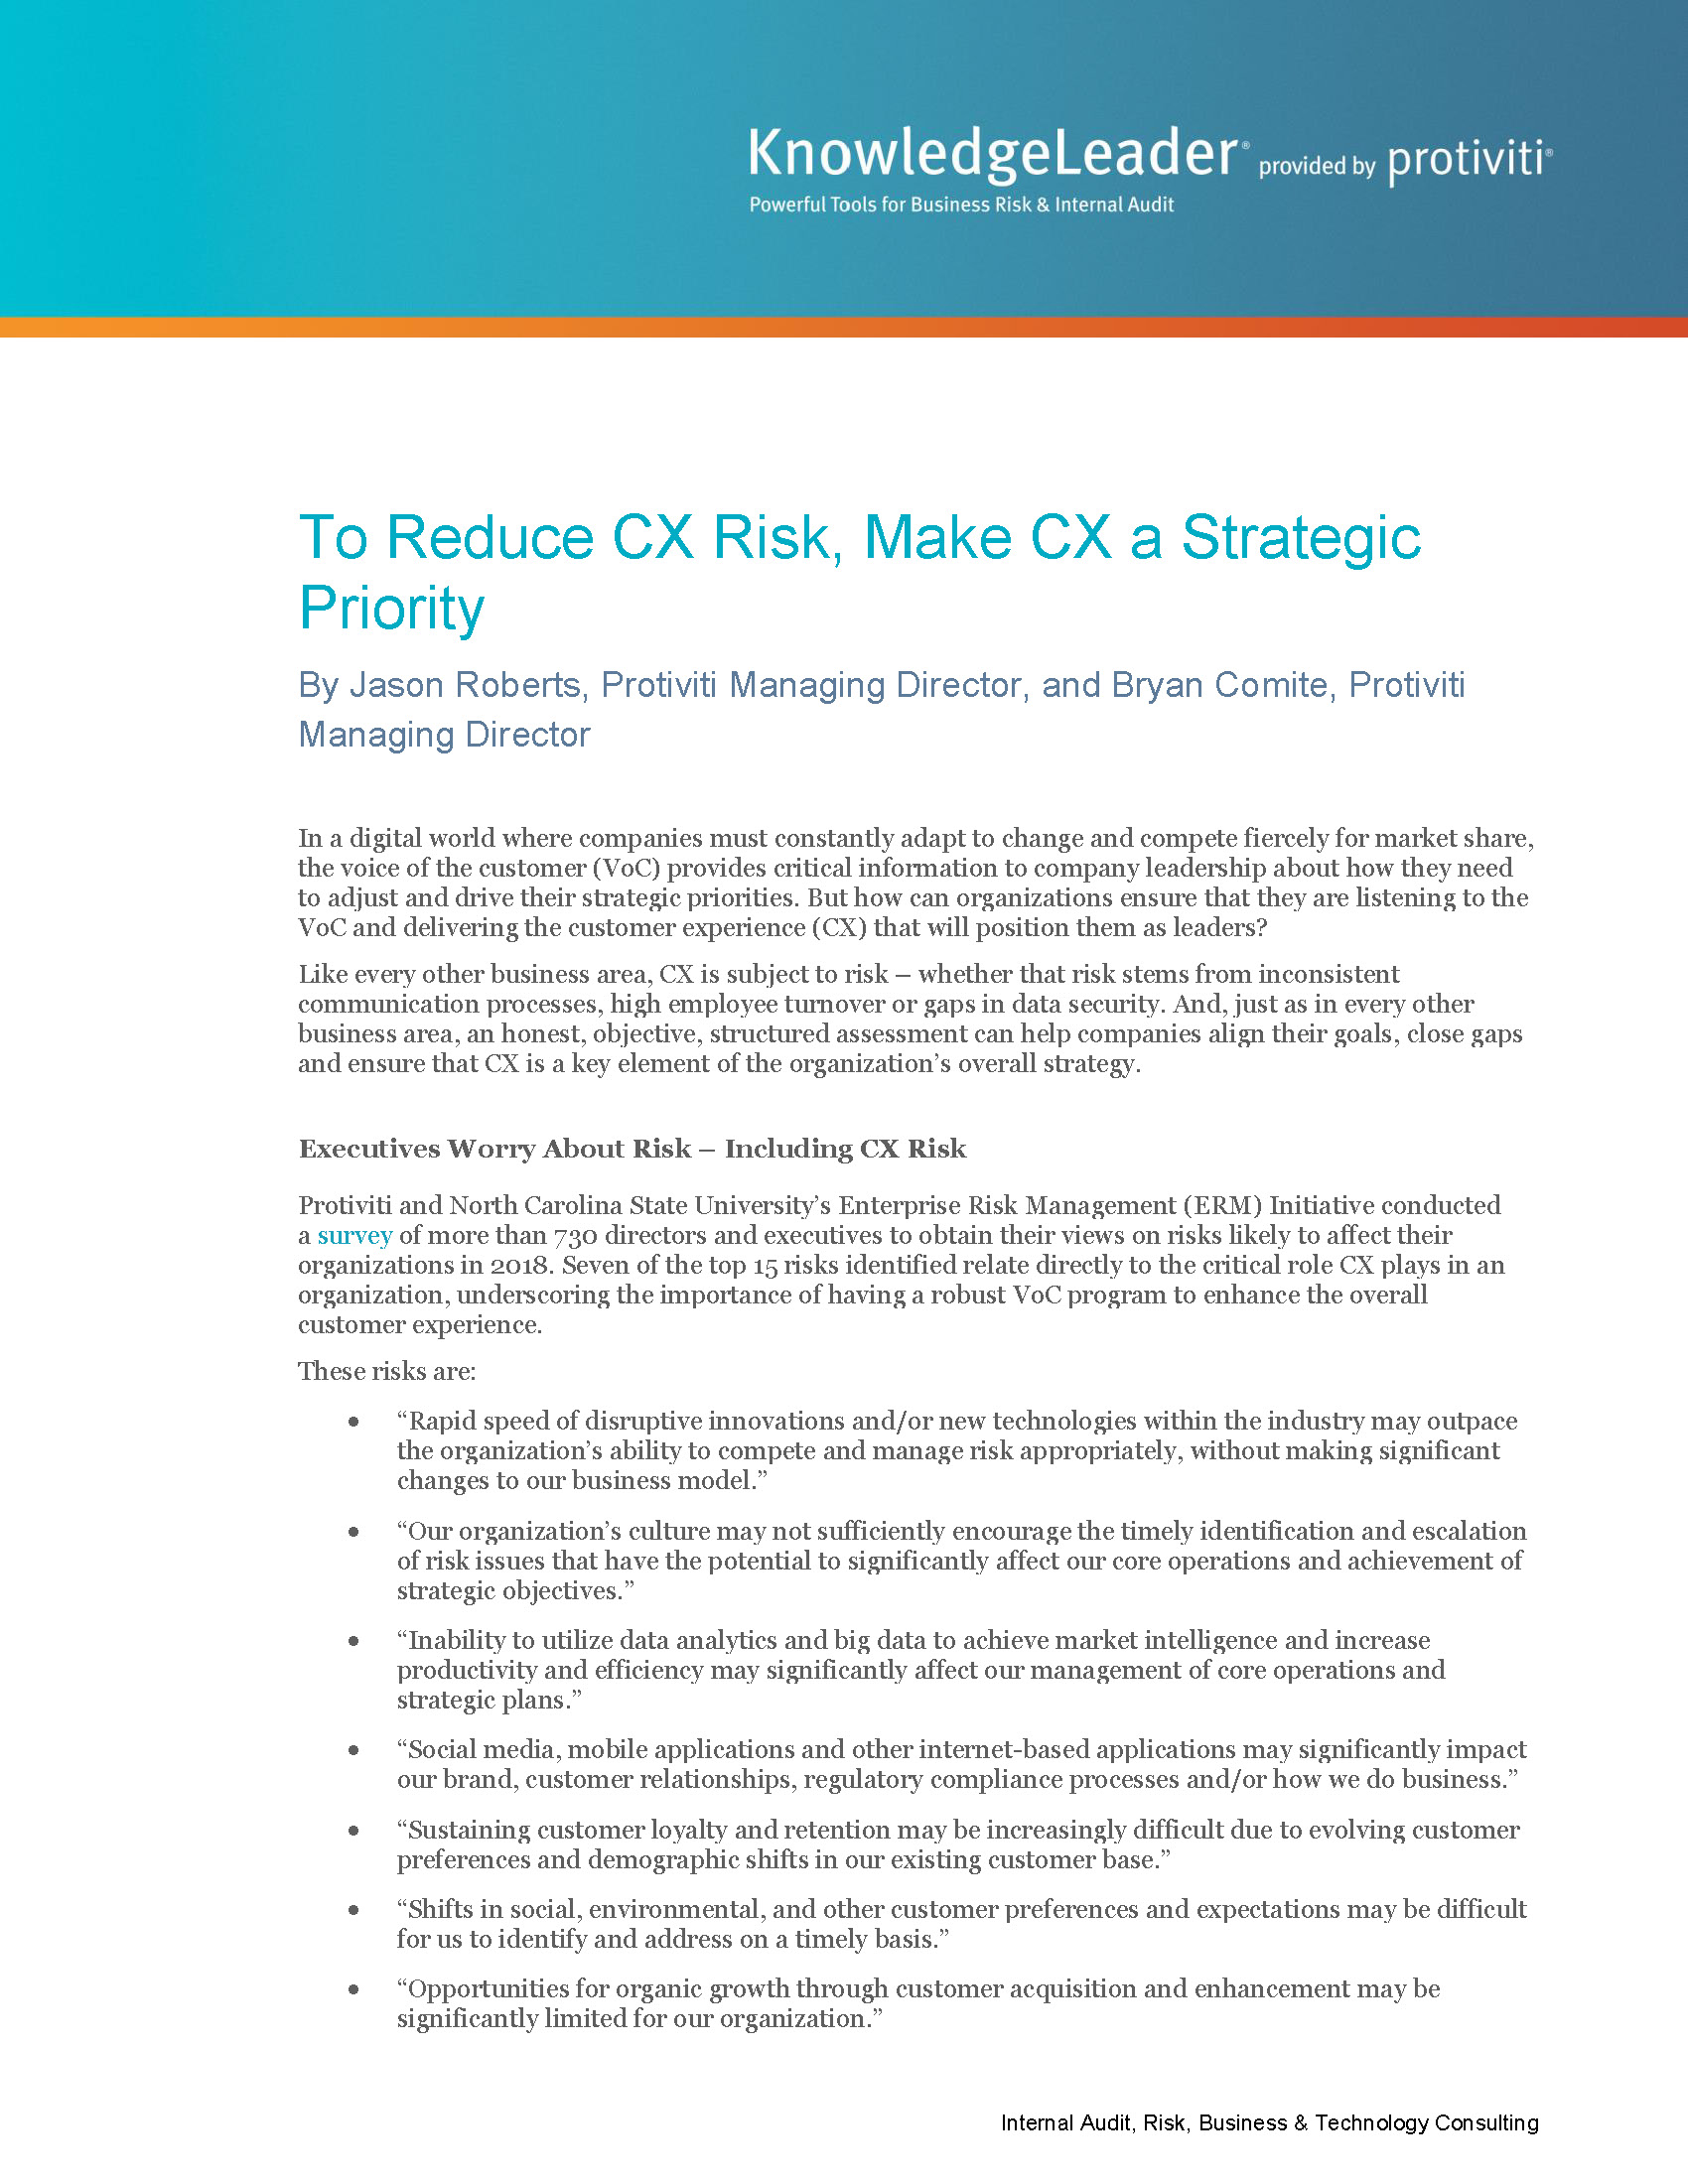 Screenshot of the first page of To Reduce CX Risk, Make CX a Strategic Priority